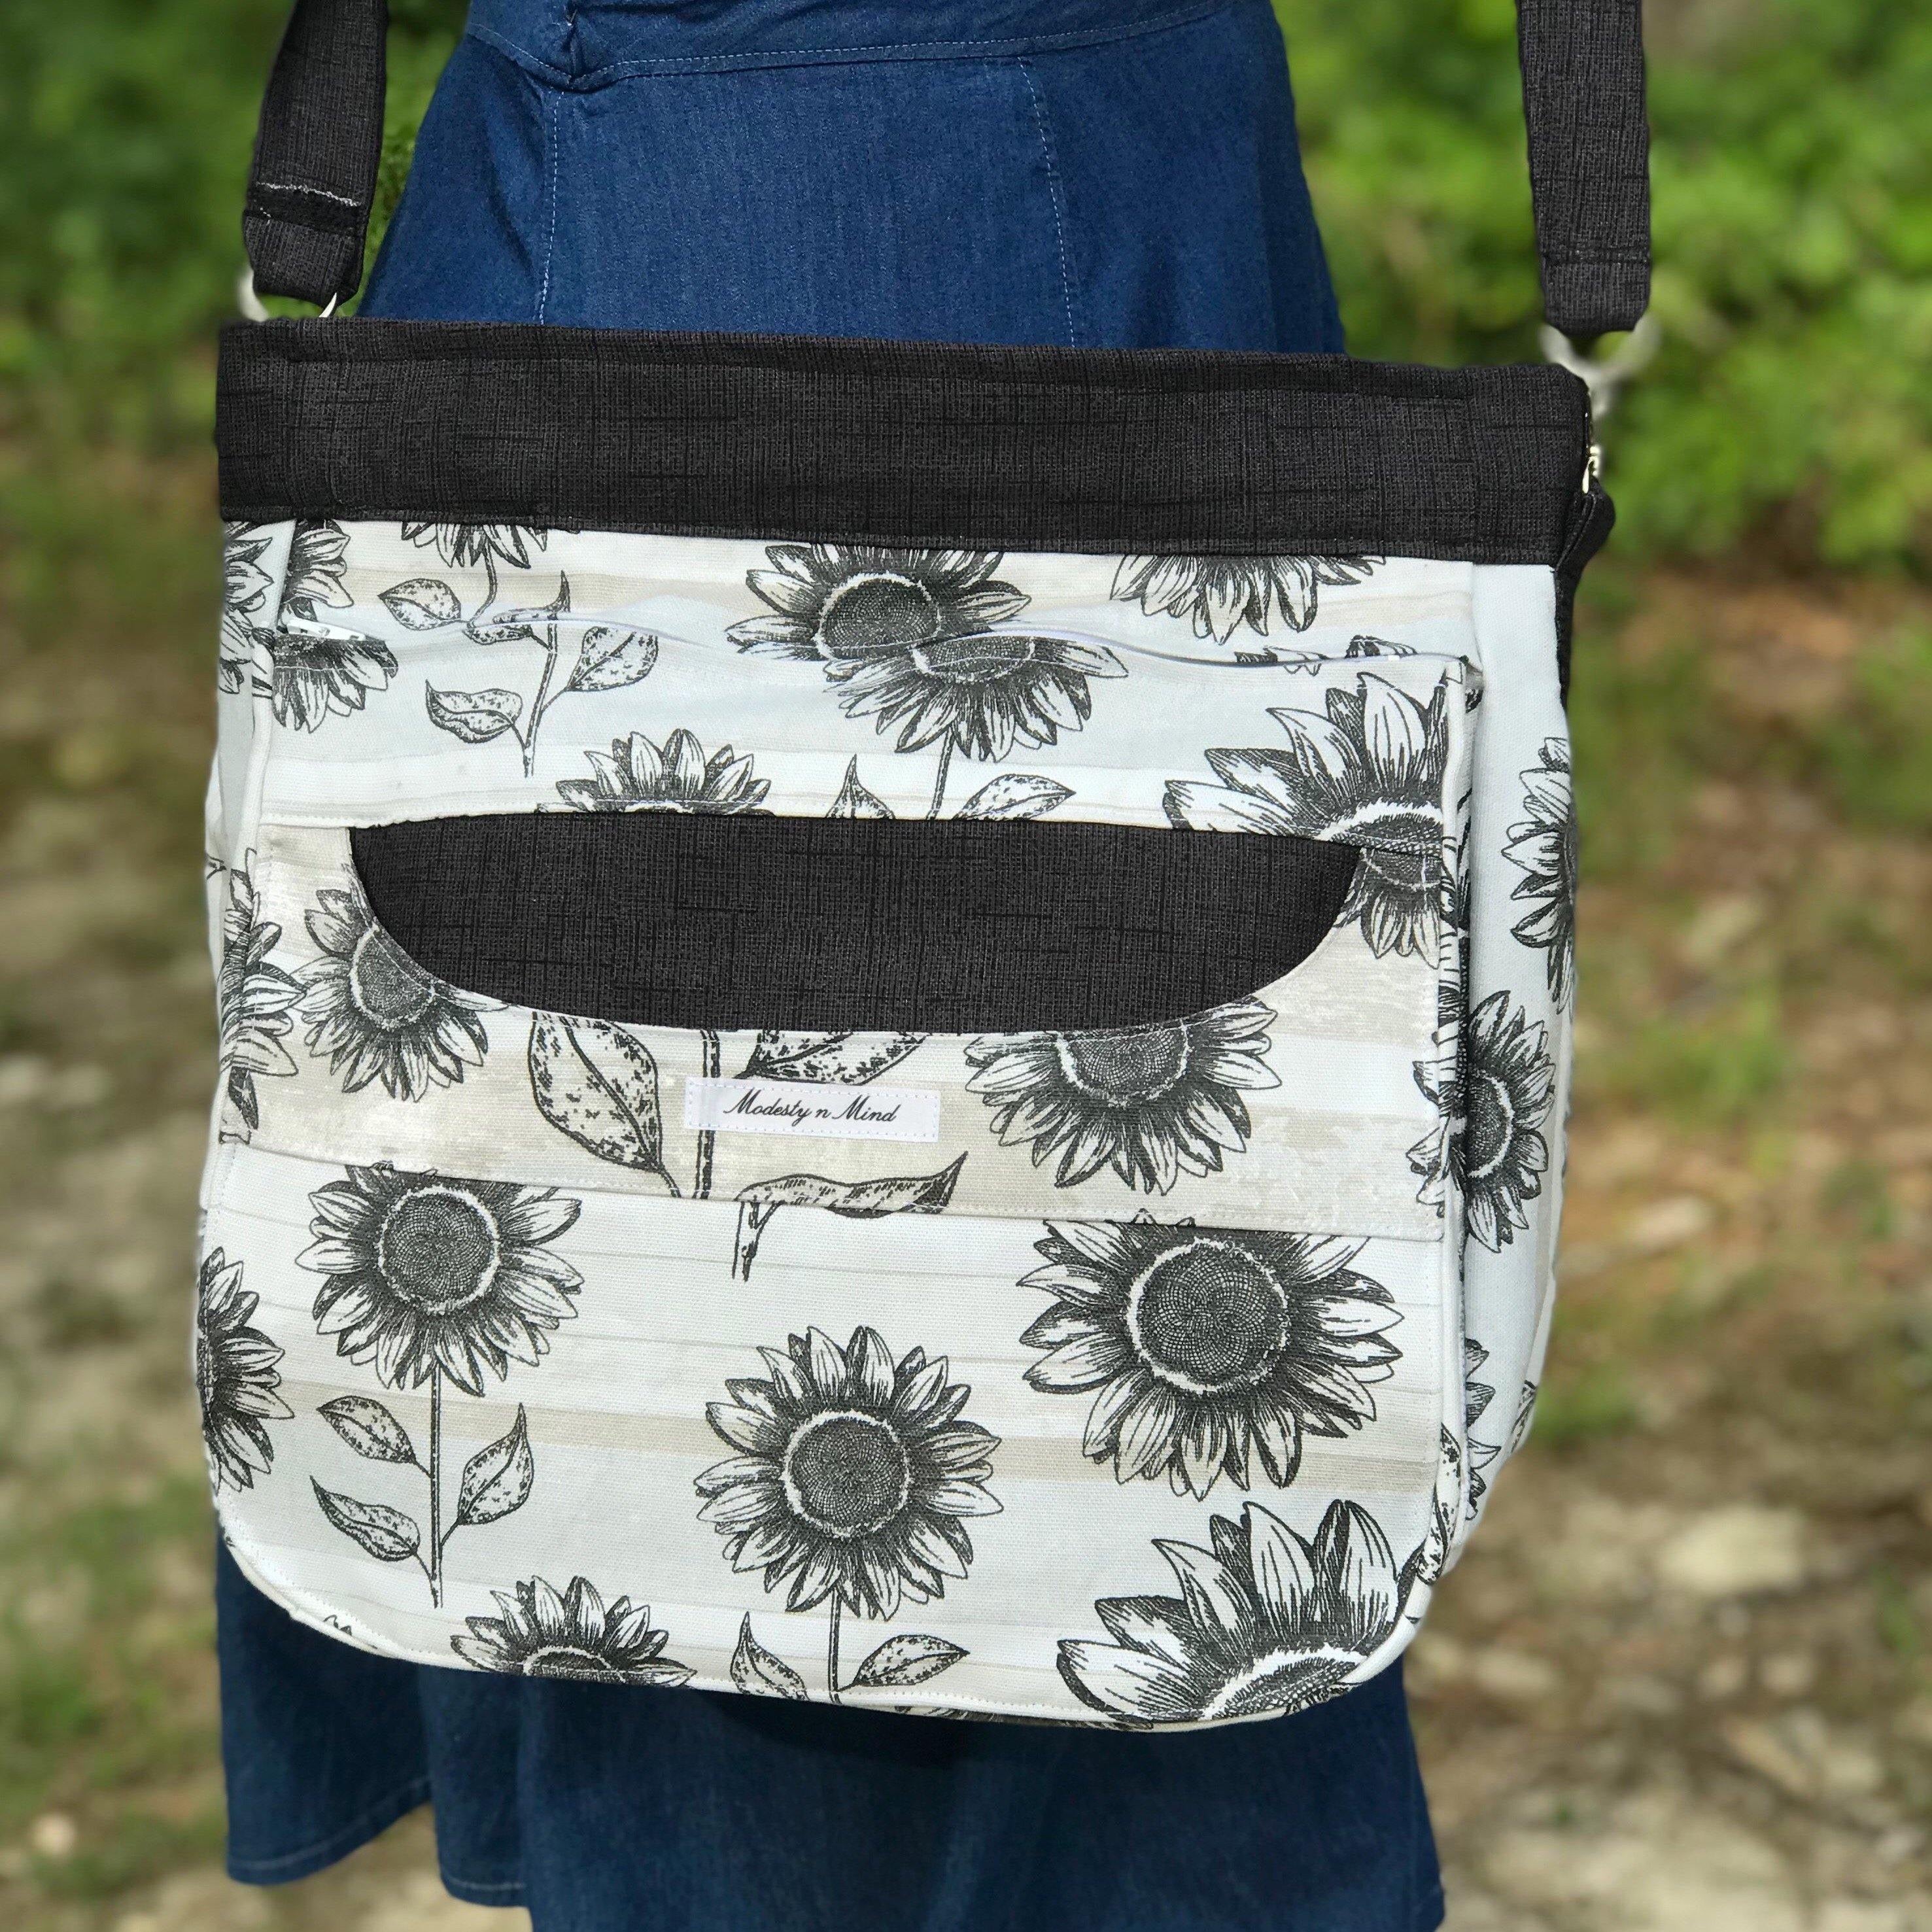 Canvas Totes with Pockets | Blue Floral Everything Tote – Modesty n Mind